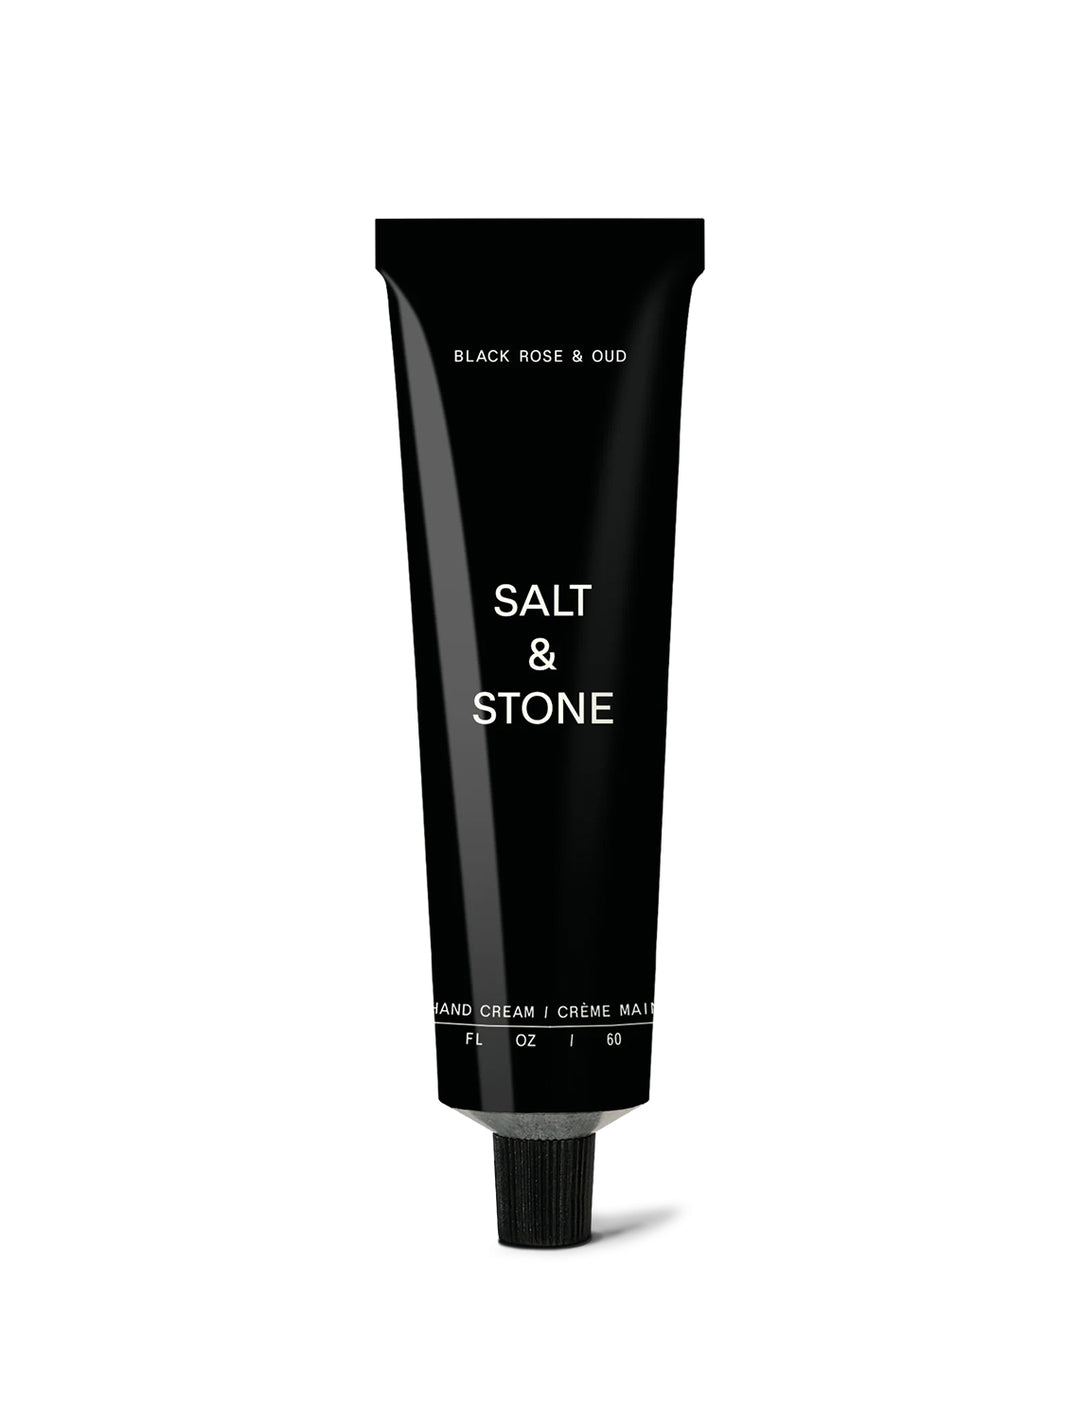 Salt + Stone's hand cream in black rose and oud.